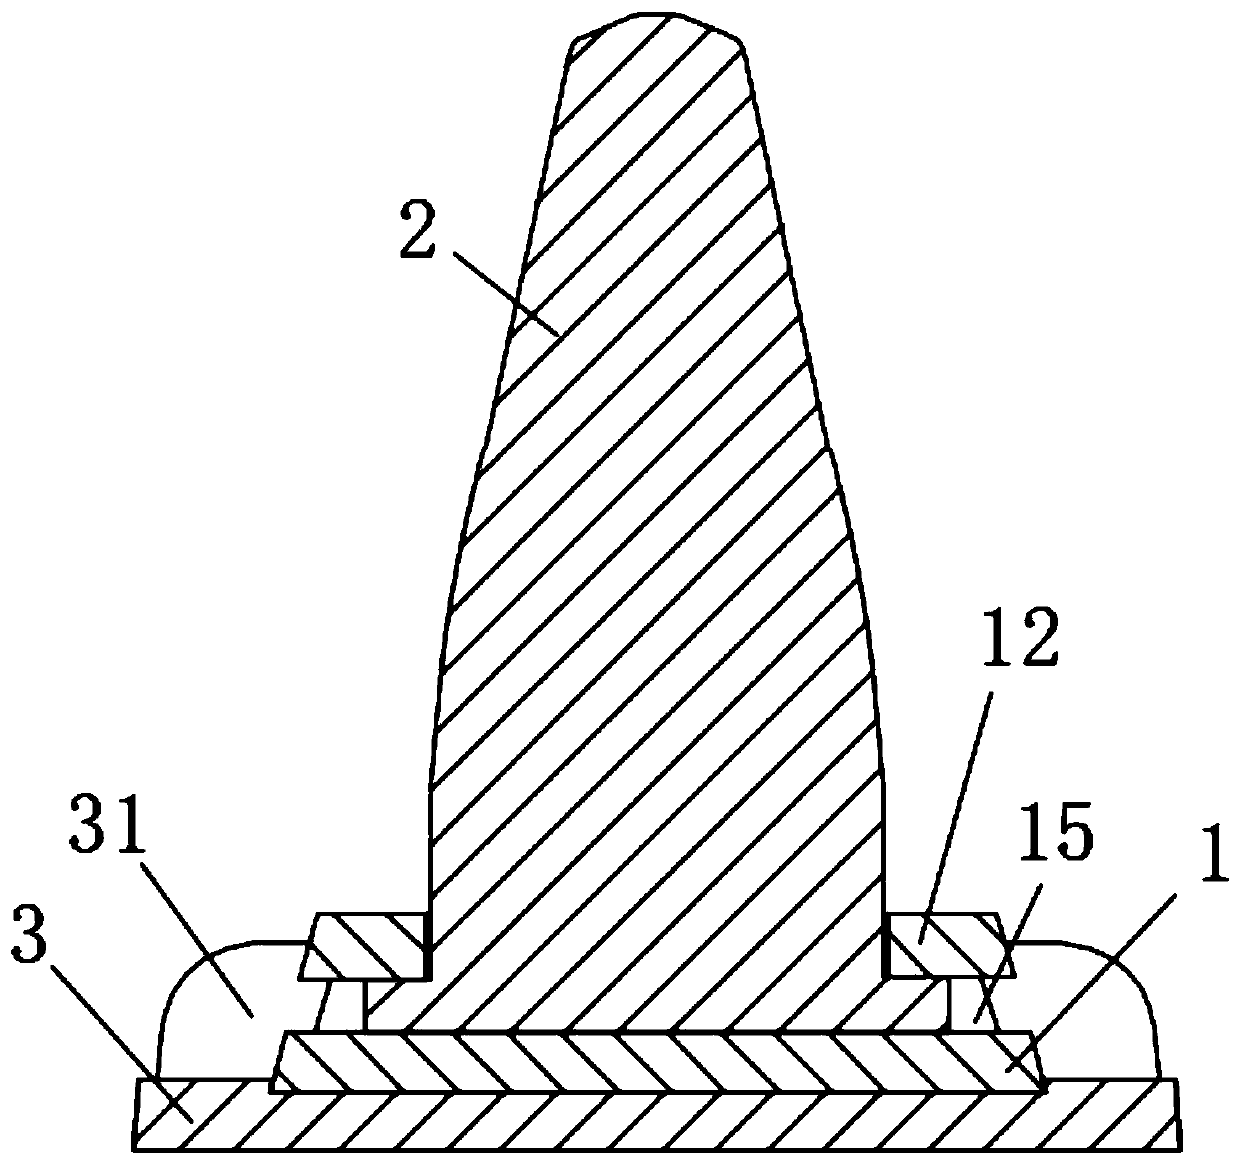 Nail column and edge-cladding glass assembly with nail column